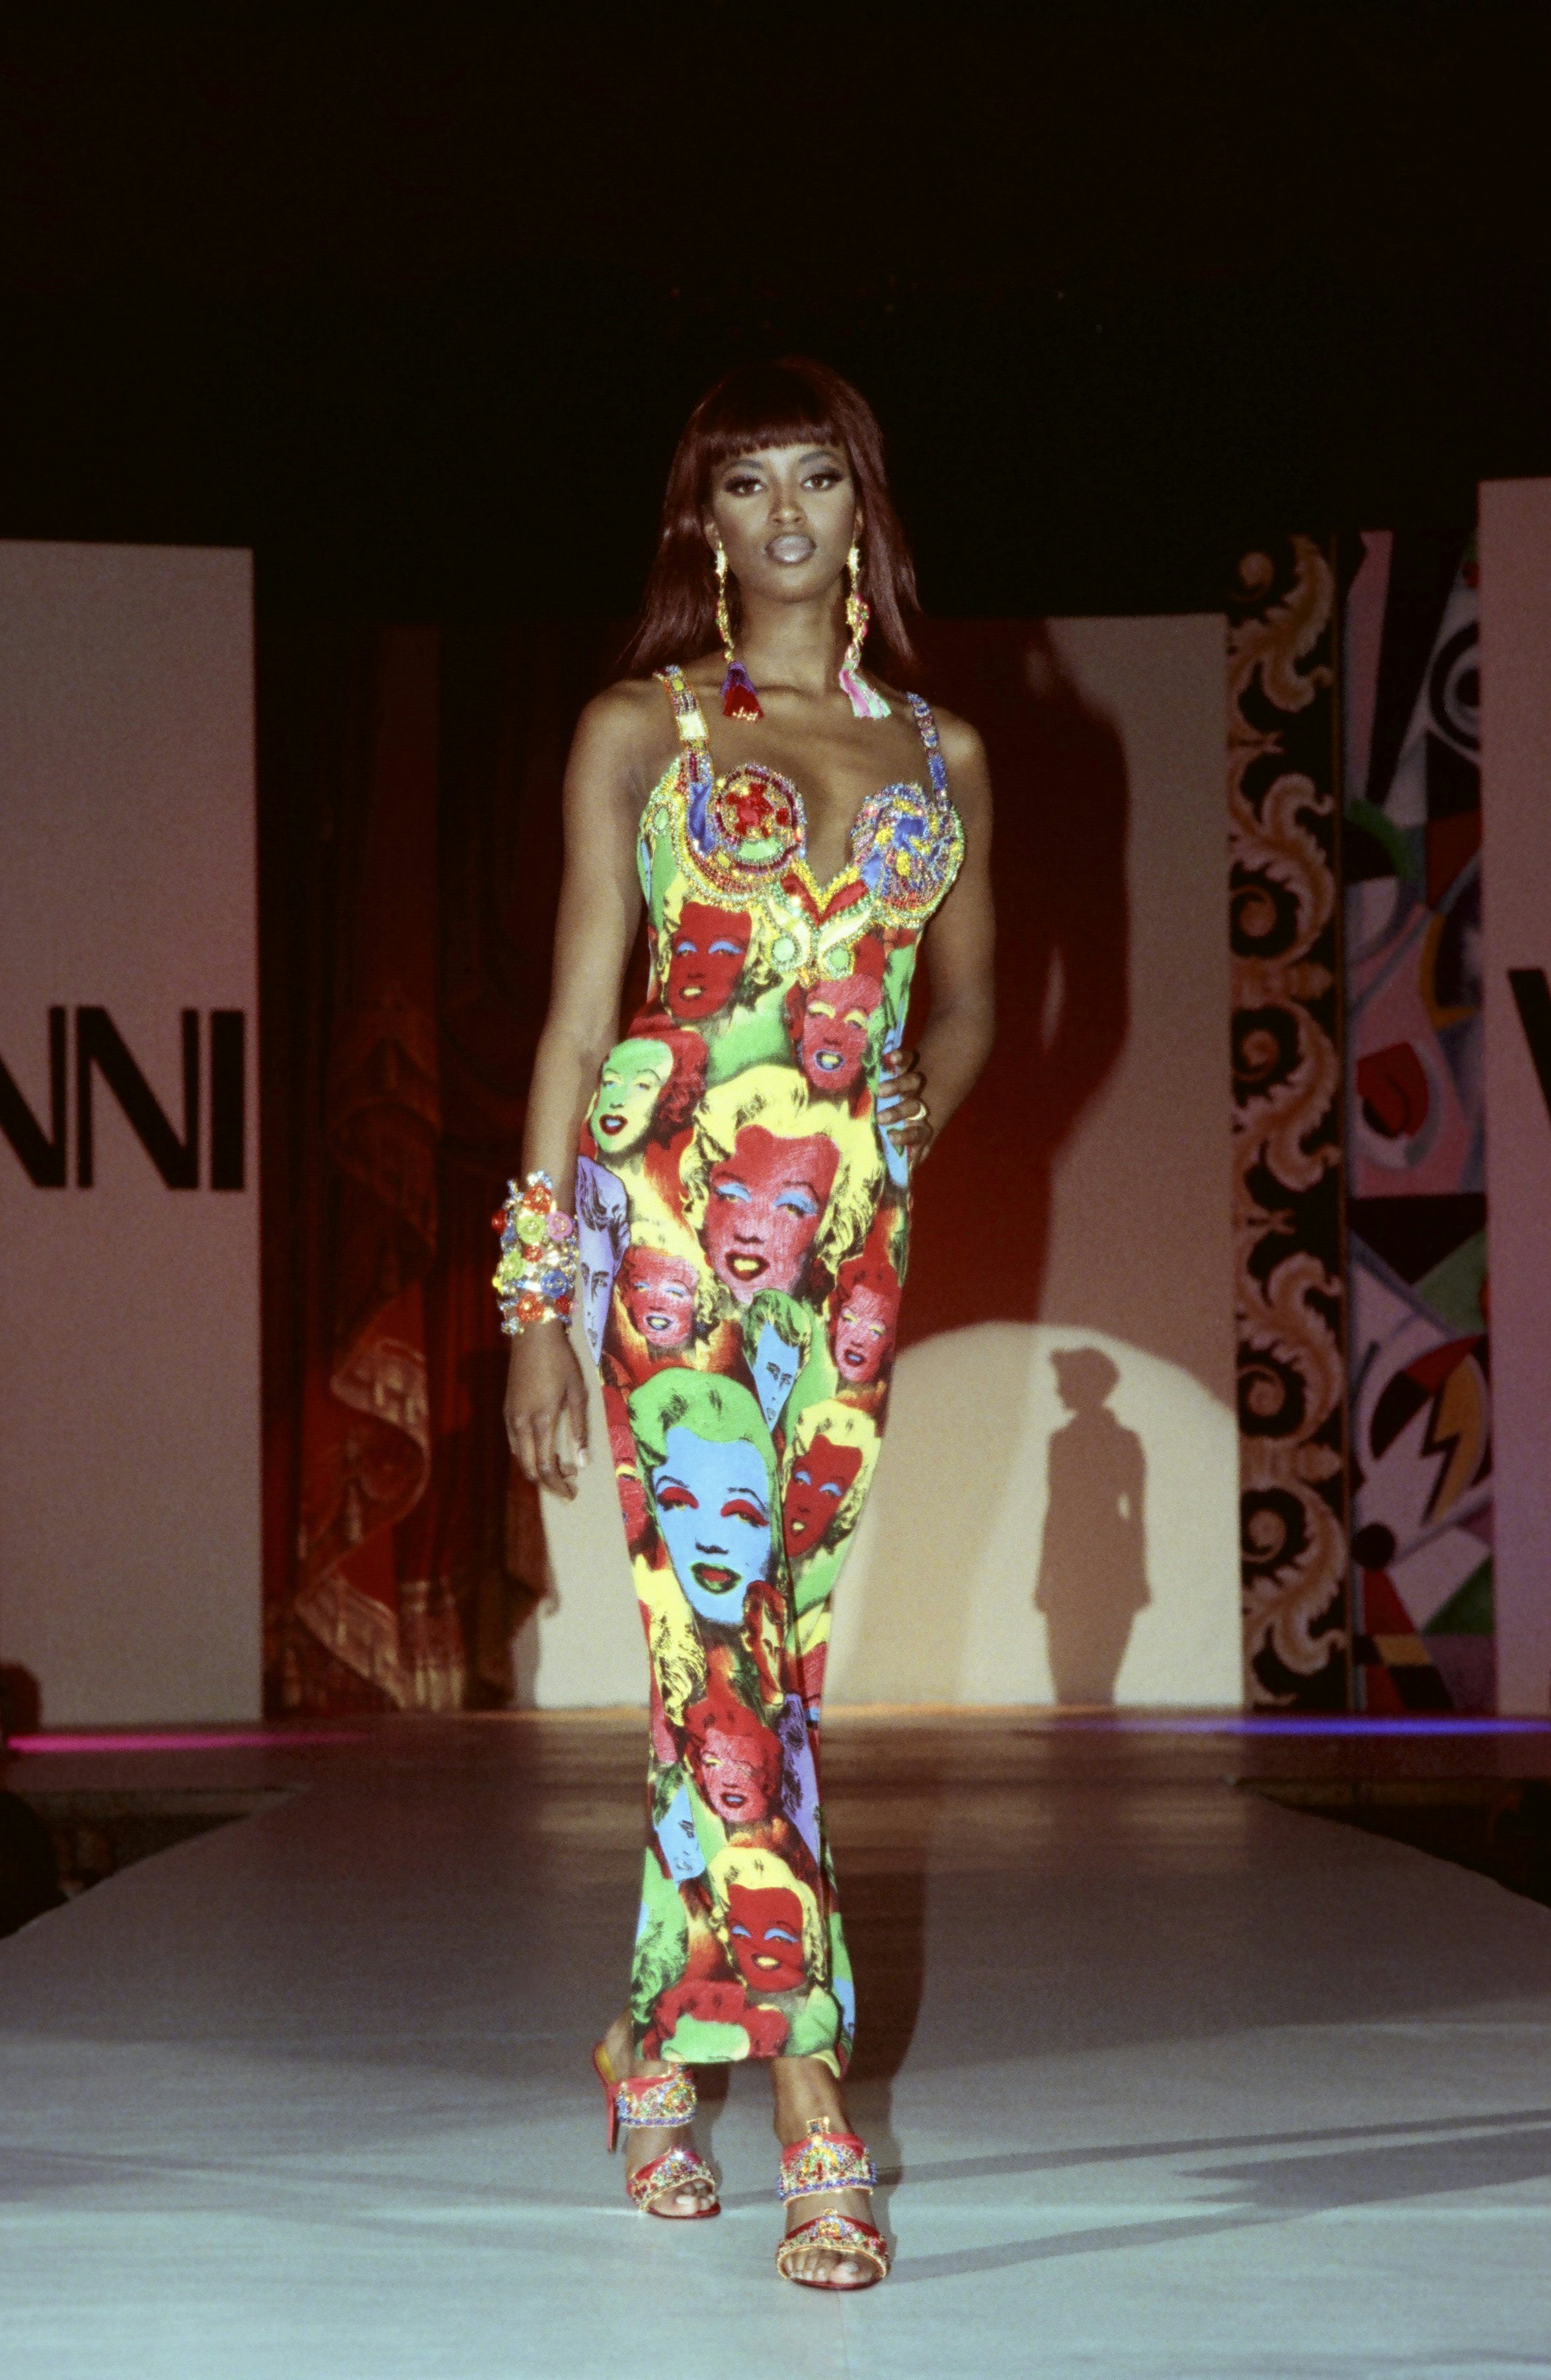 Versace Spring 2018 collection: Remembering Gianni Versace